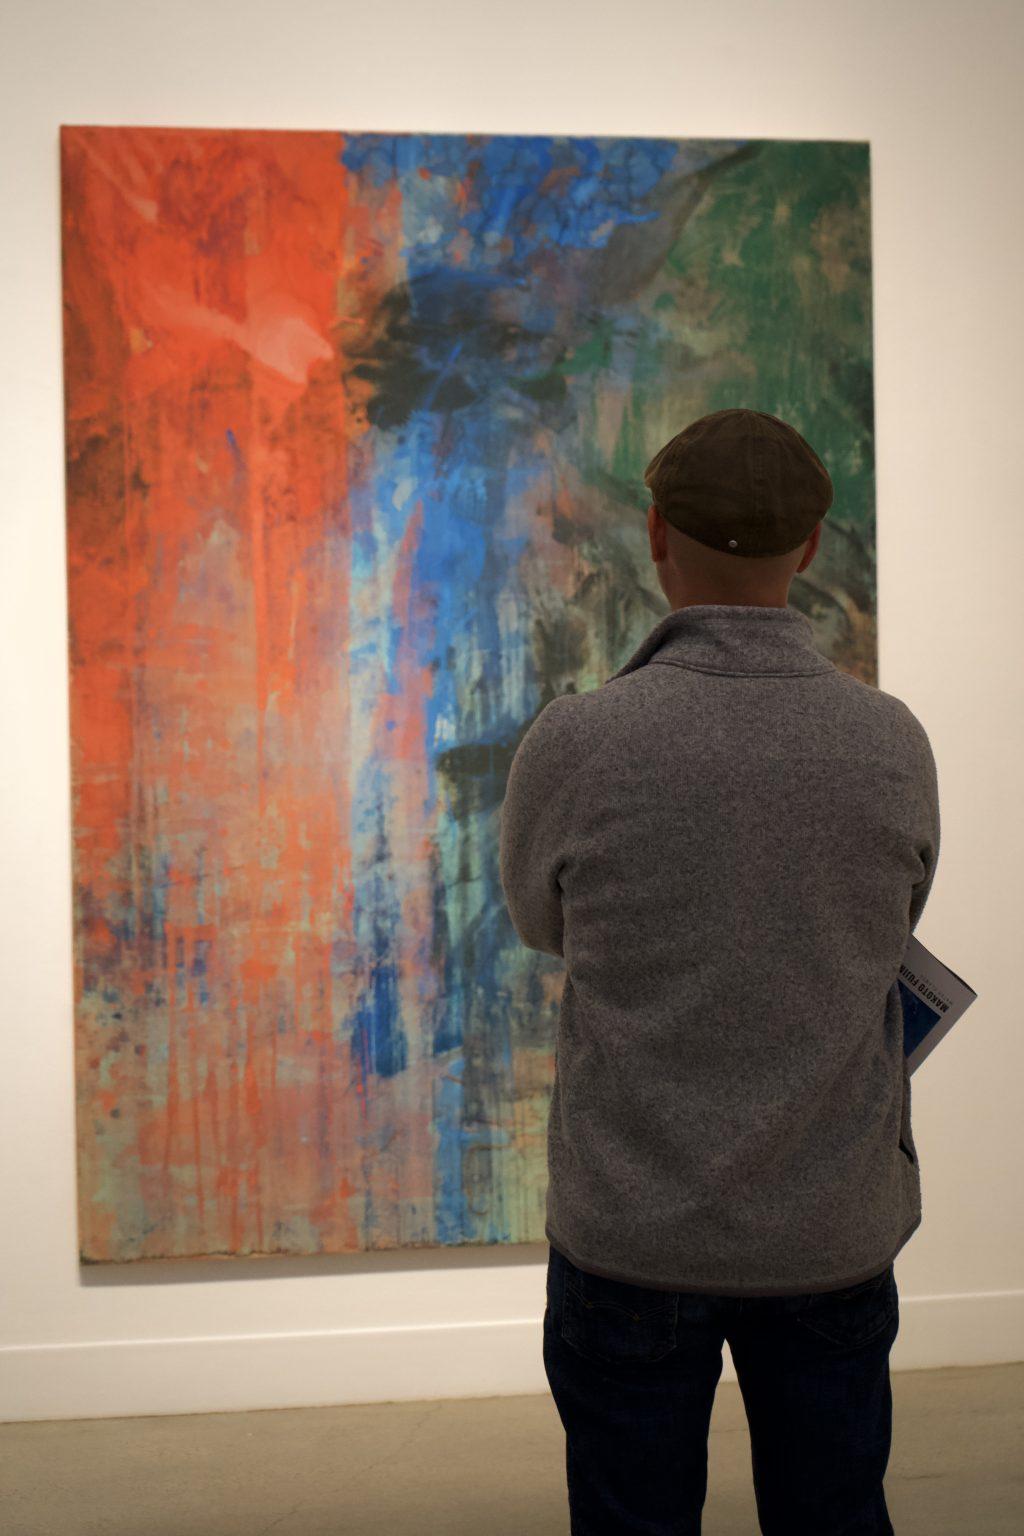 An observer contemplates "The Fire and the Rose Are One" on Jan. 20, in the Weisman Museum. The explosion of colors featured vibrant red, blue and green shades that invigorated the canvas.